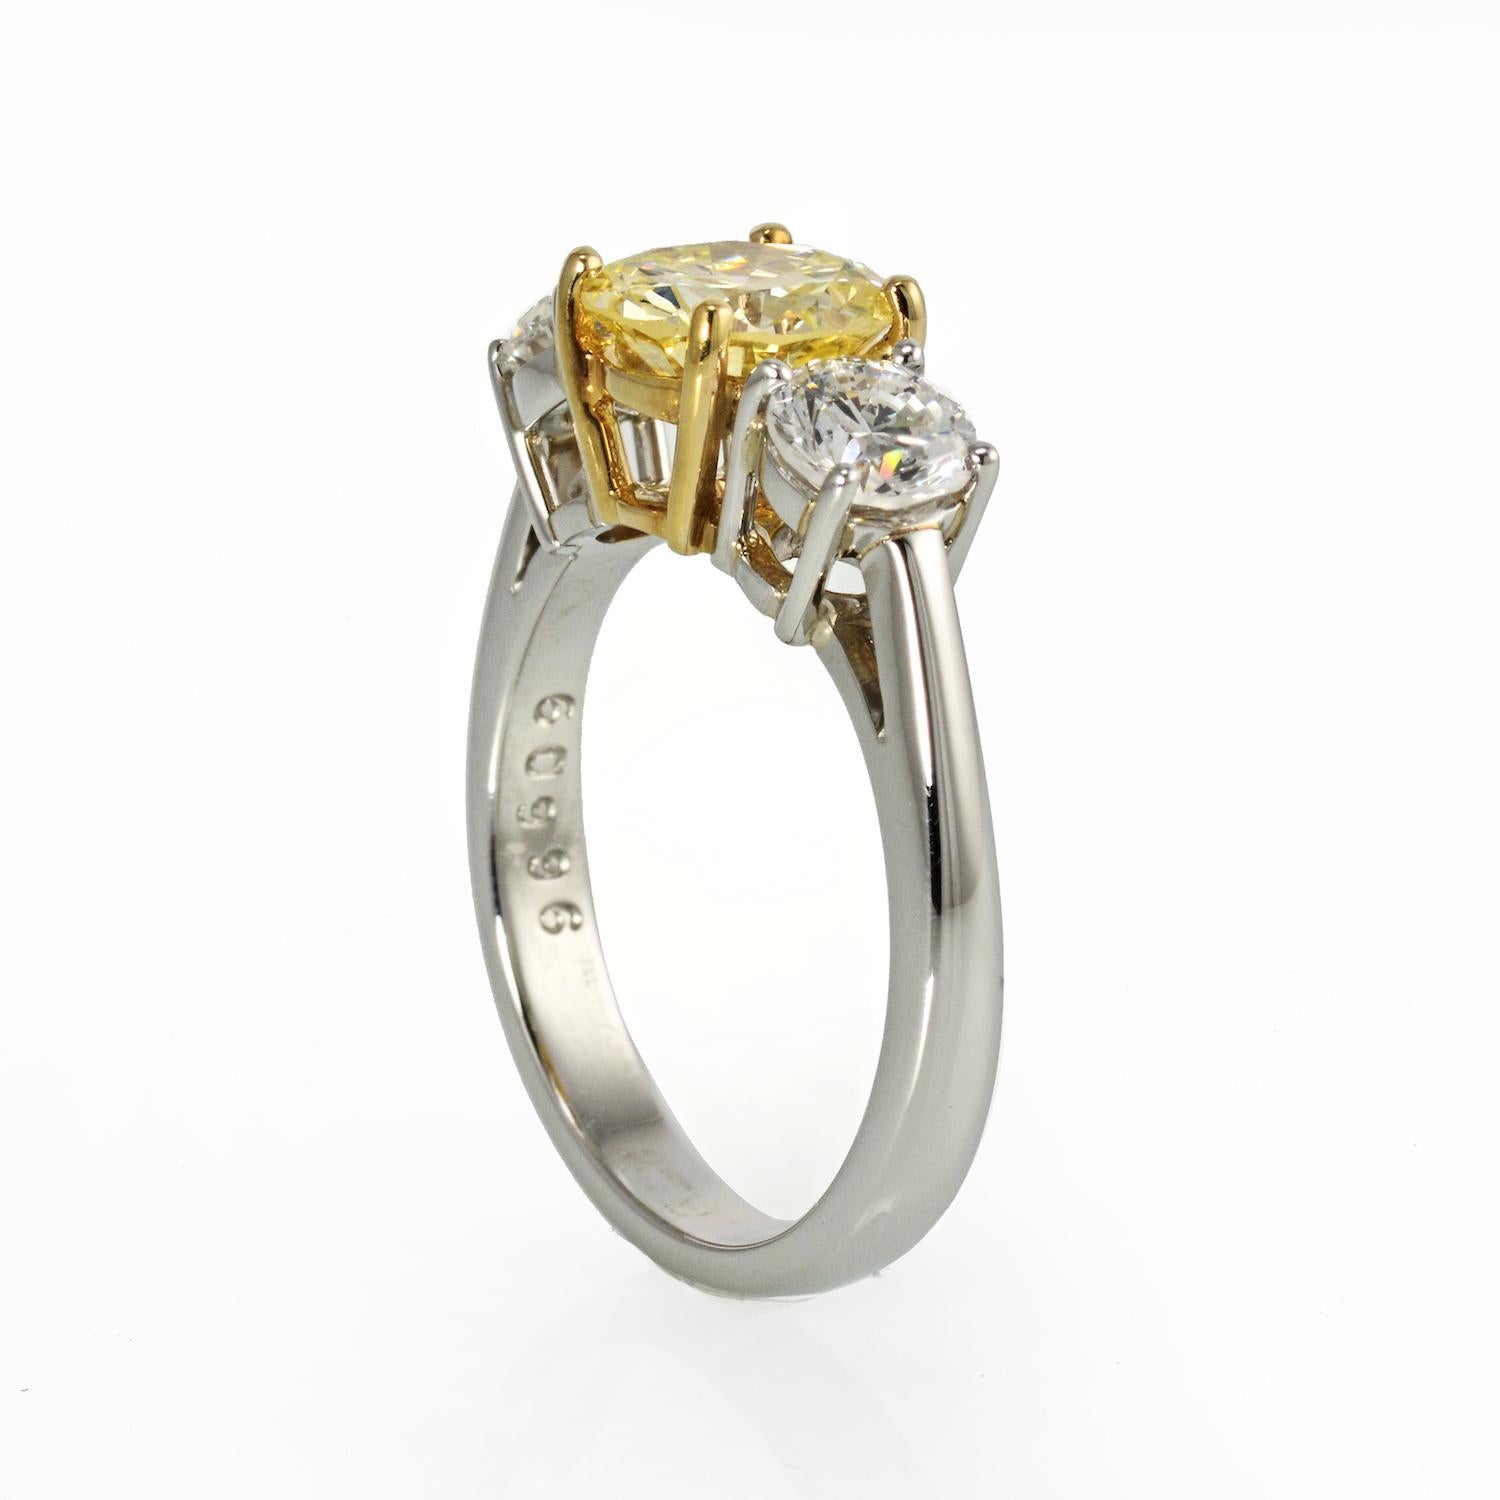 This 1.45 ct Natural Color Fancy Yellow center diamond is flanked by 2 colorless 1/4 ct round diamonds. The diamonds are set in a hand-crafted Platinum & 18 Yellow gold mounting.  The center Fancy Yellow diamond is set into a 18K yellow gold basket